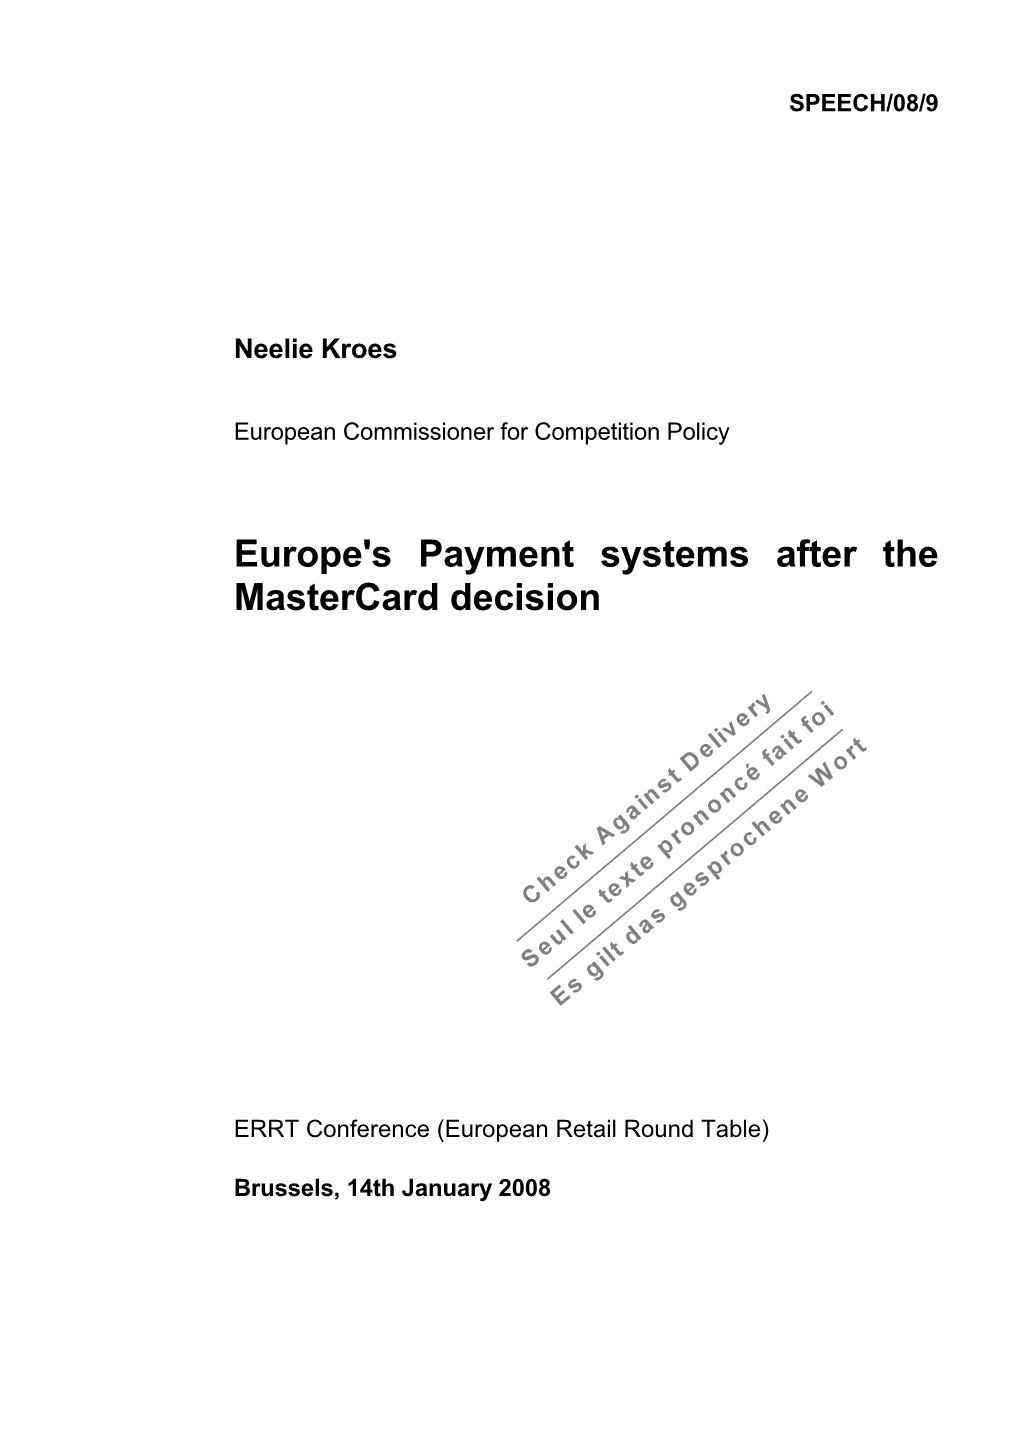 Europe's Payment Systems After the Mastercard Decision